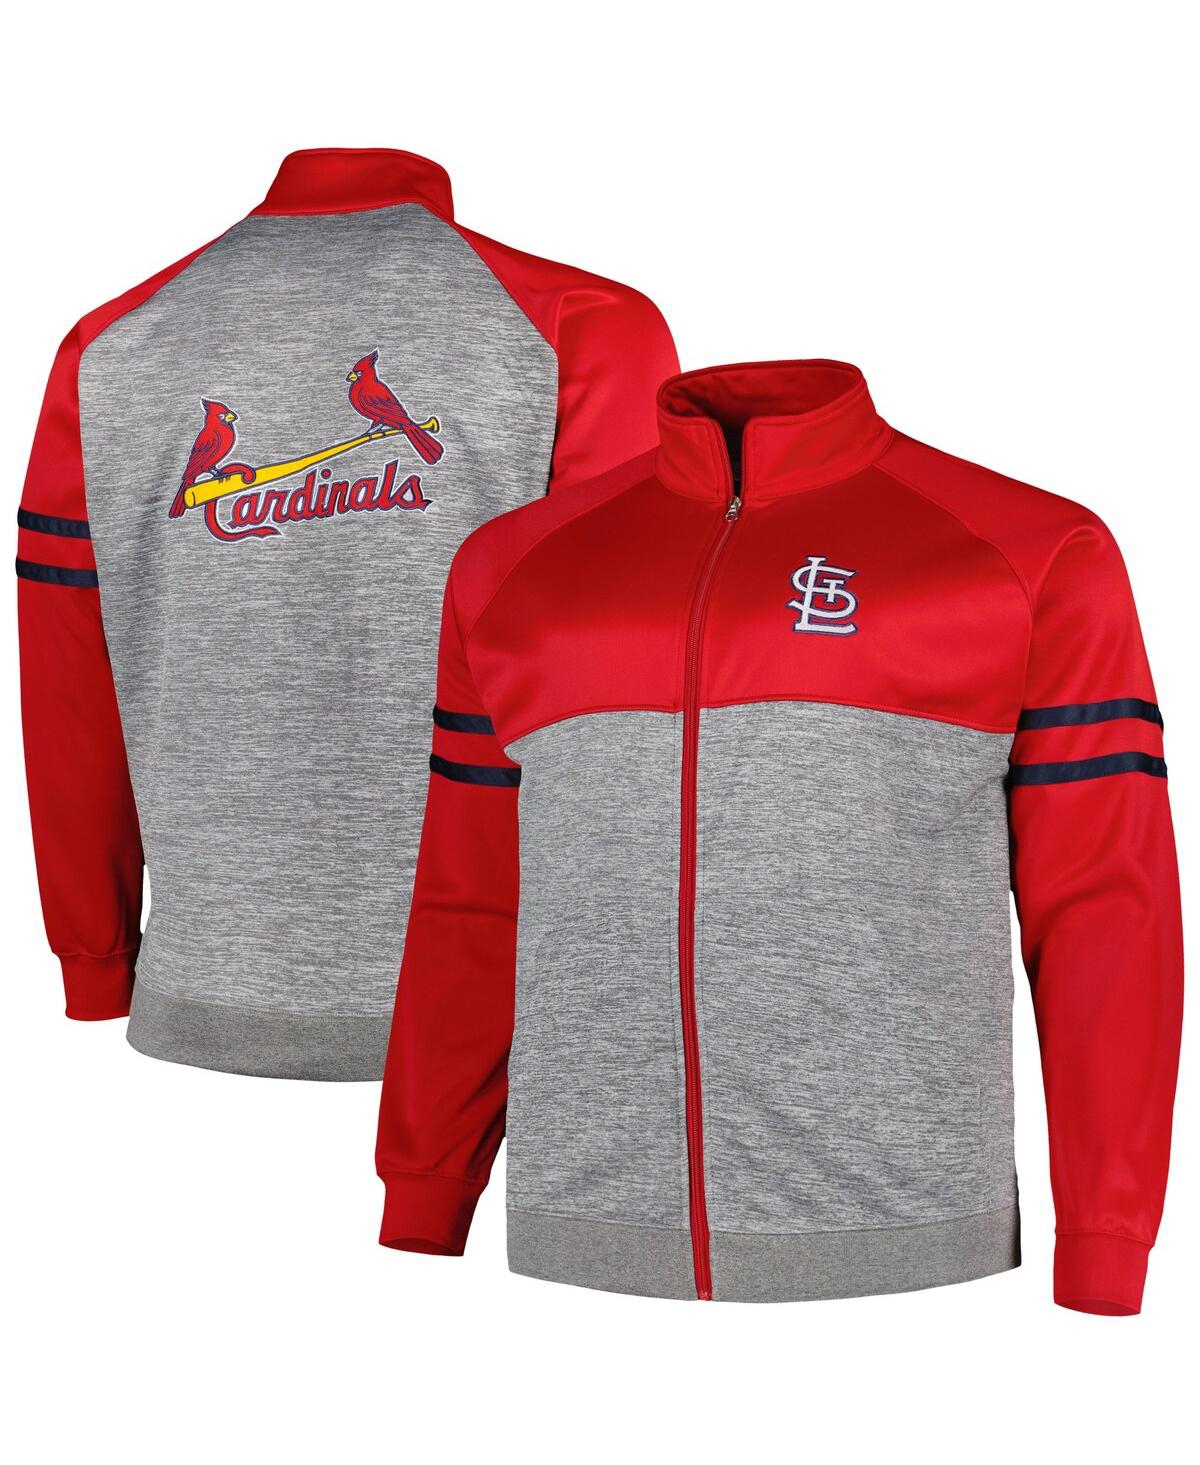 PROFILE MEN'S RED, HEATHER GRAY ST. LOUIS CARDINALS BIG AND TALL RAGLAN FULL-ZIP TRACK JACKET